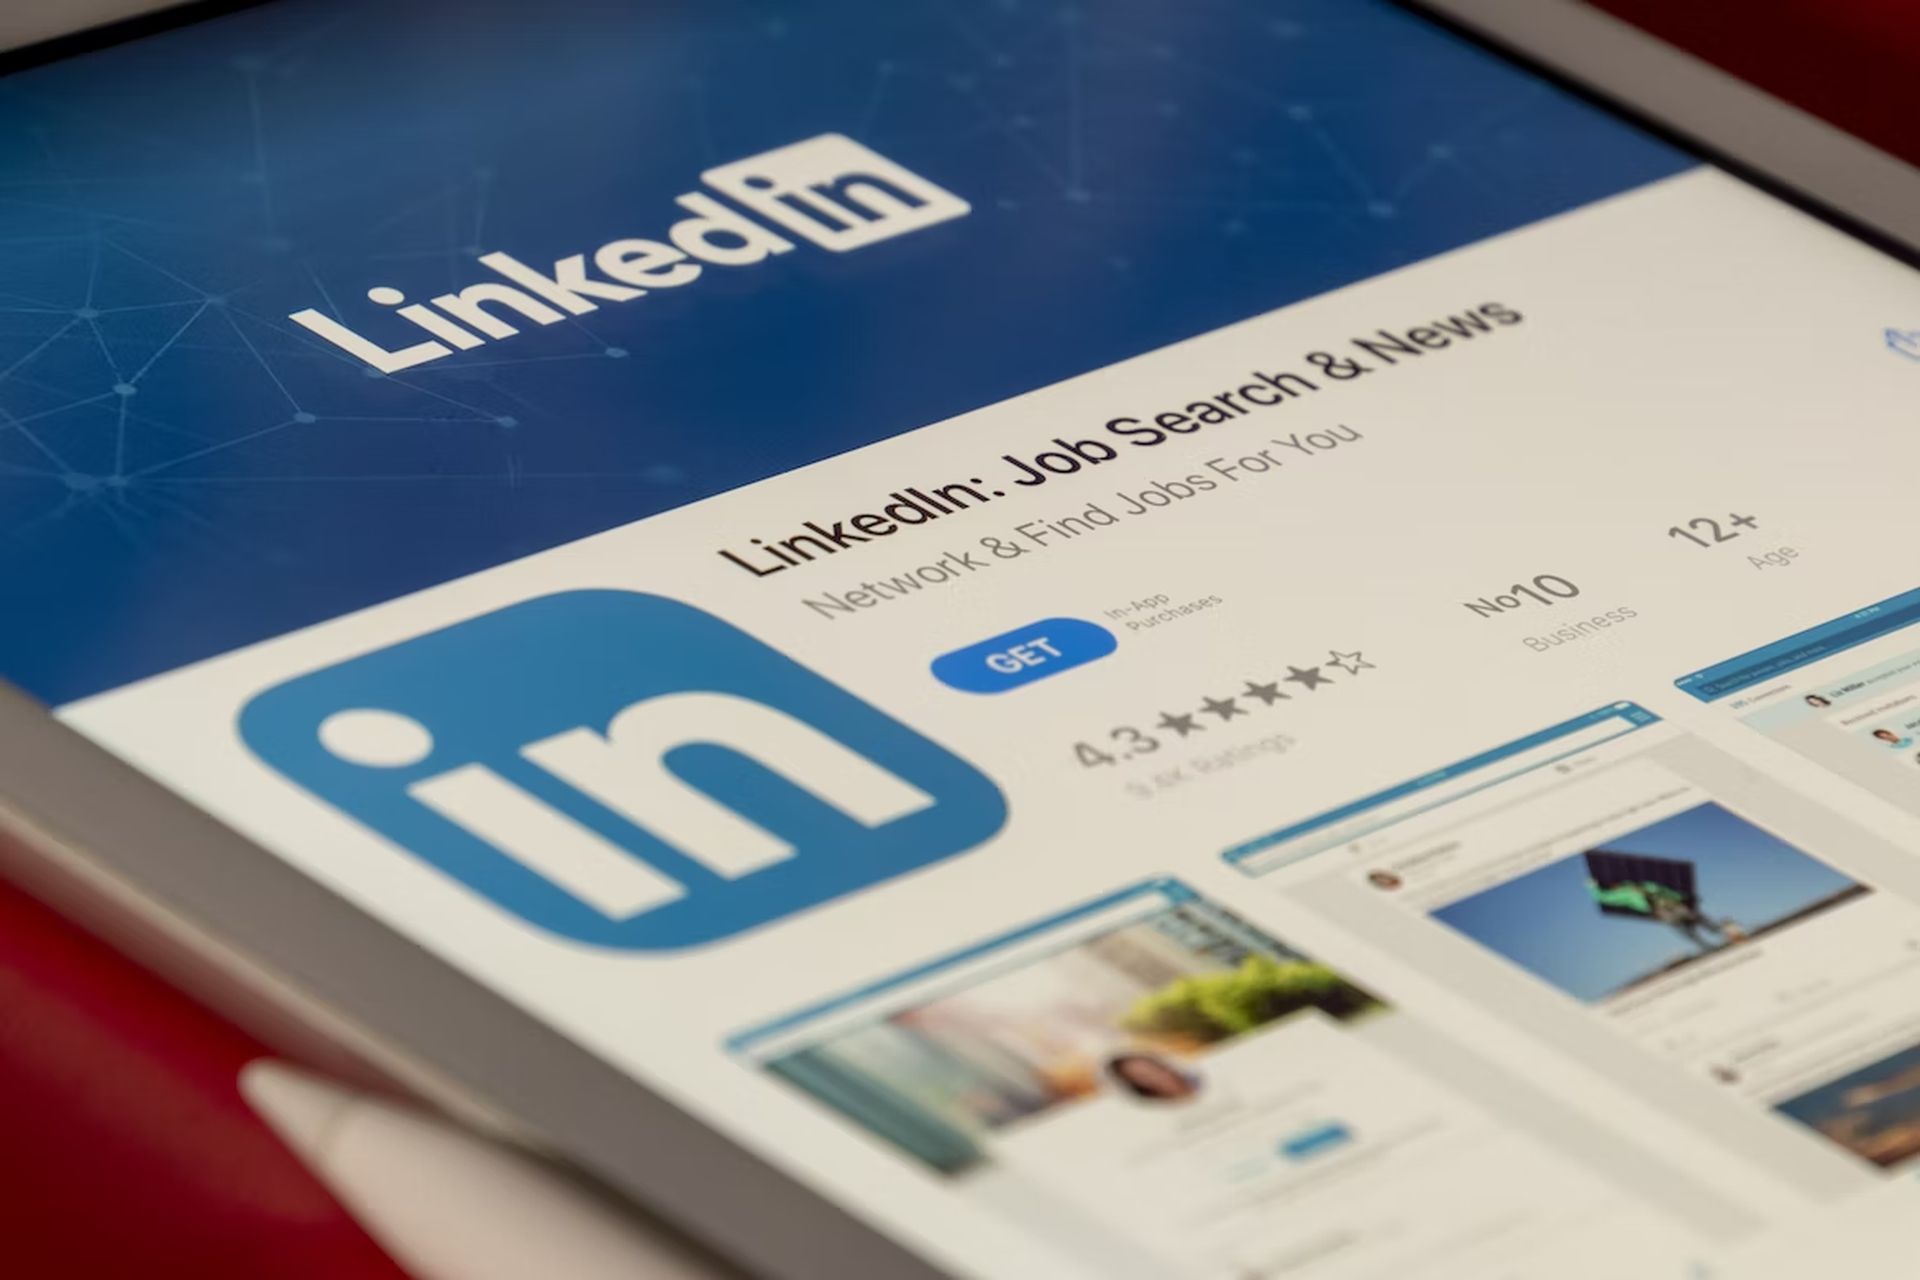 LinkedIn donates Feathr, their feature store, to the Linux Foundation